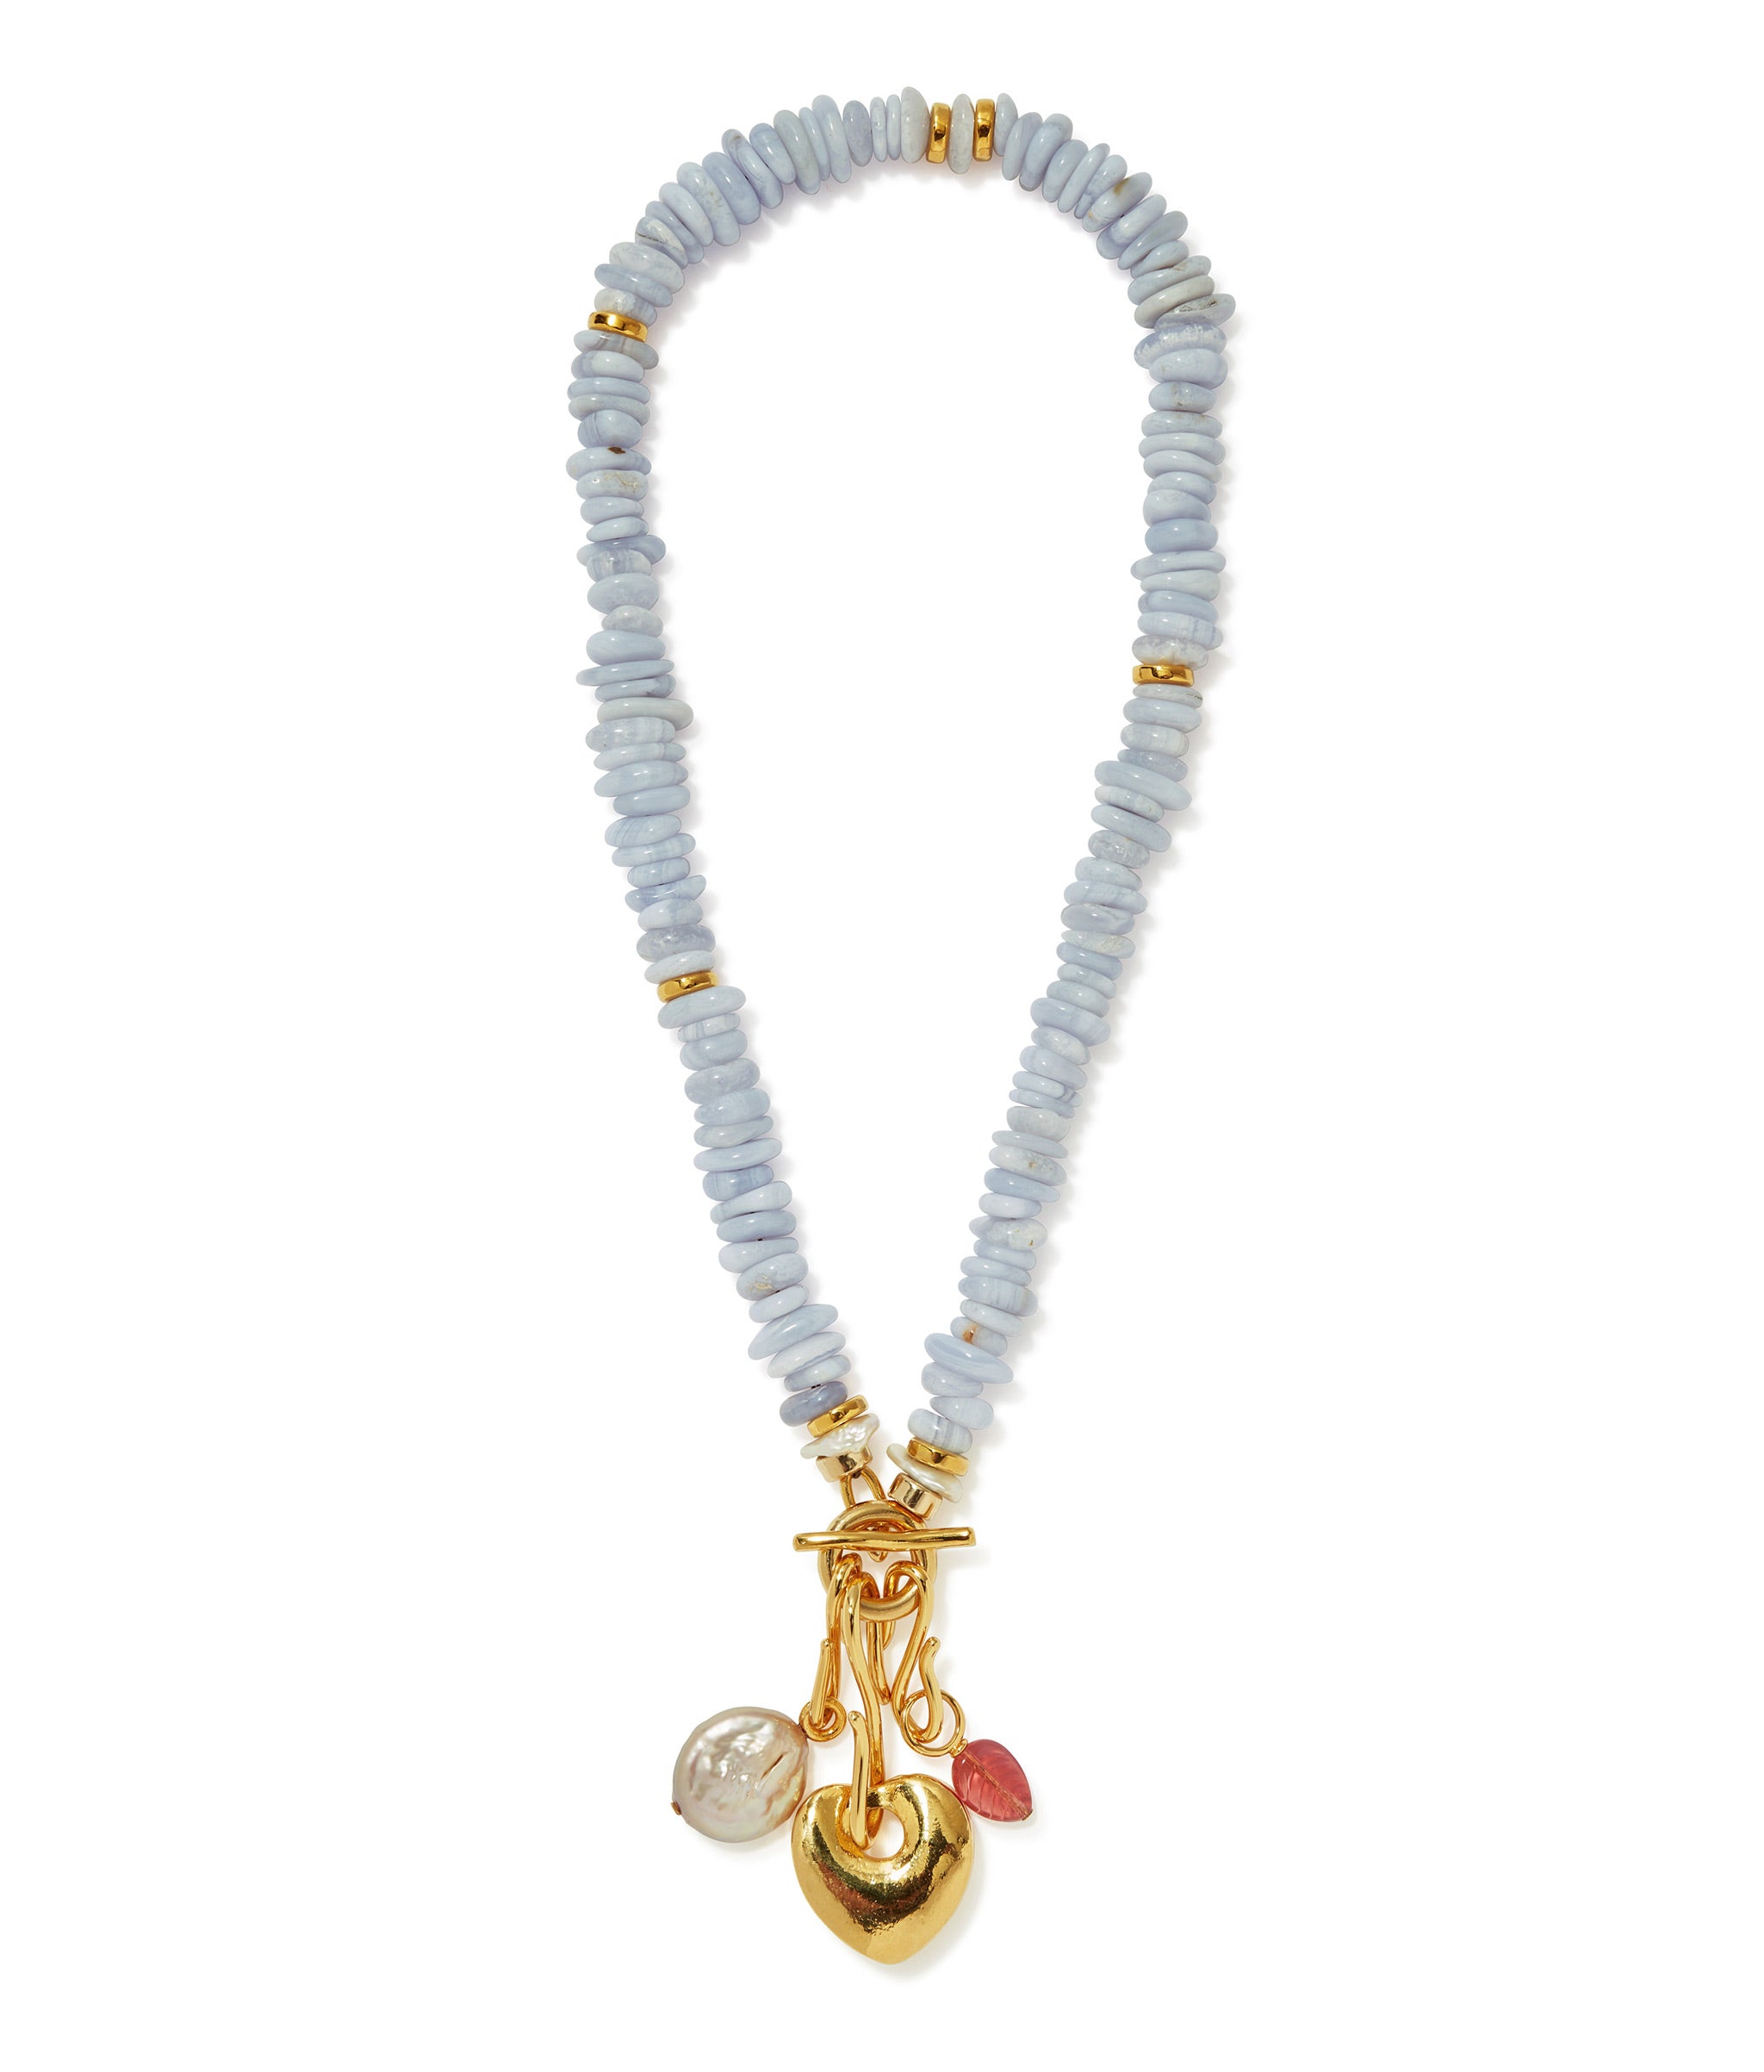 Mood Necklace in Blue Lace Agate. Single-strand of light blue agate beads with gold-plated toggle, with charms attached.